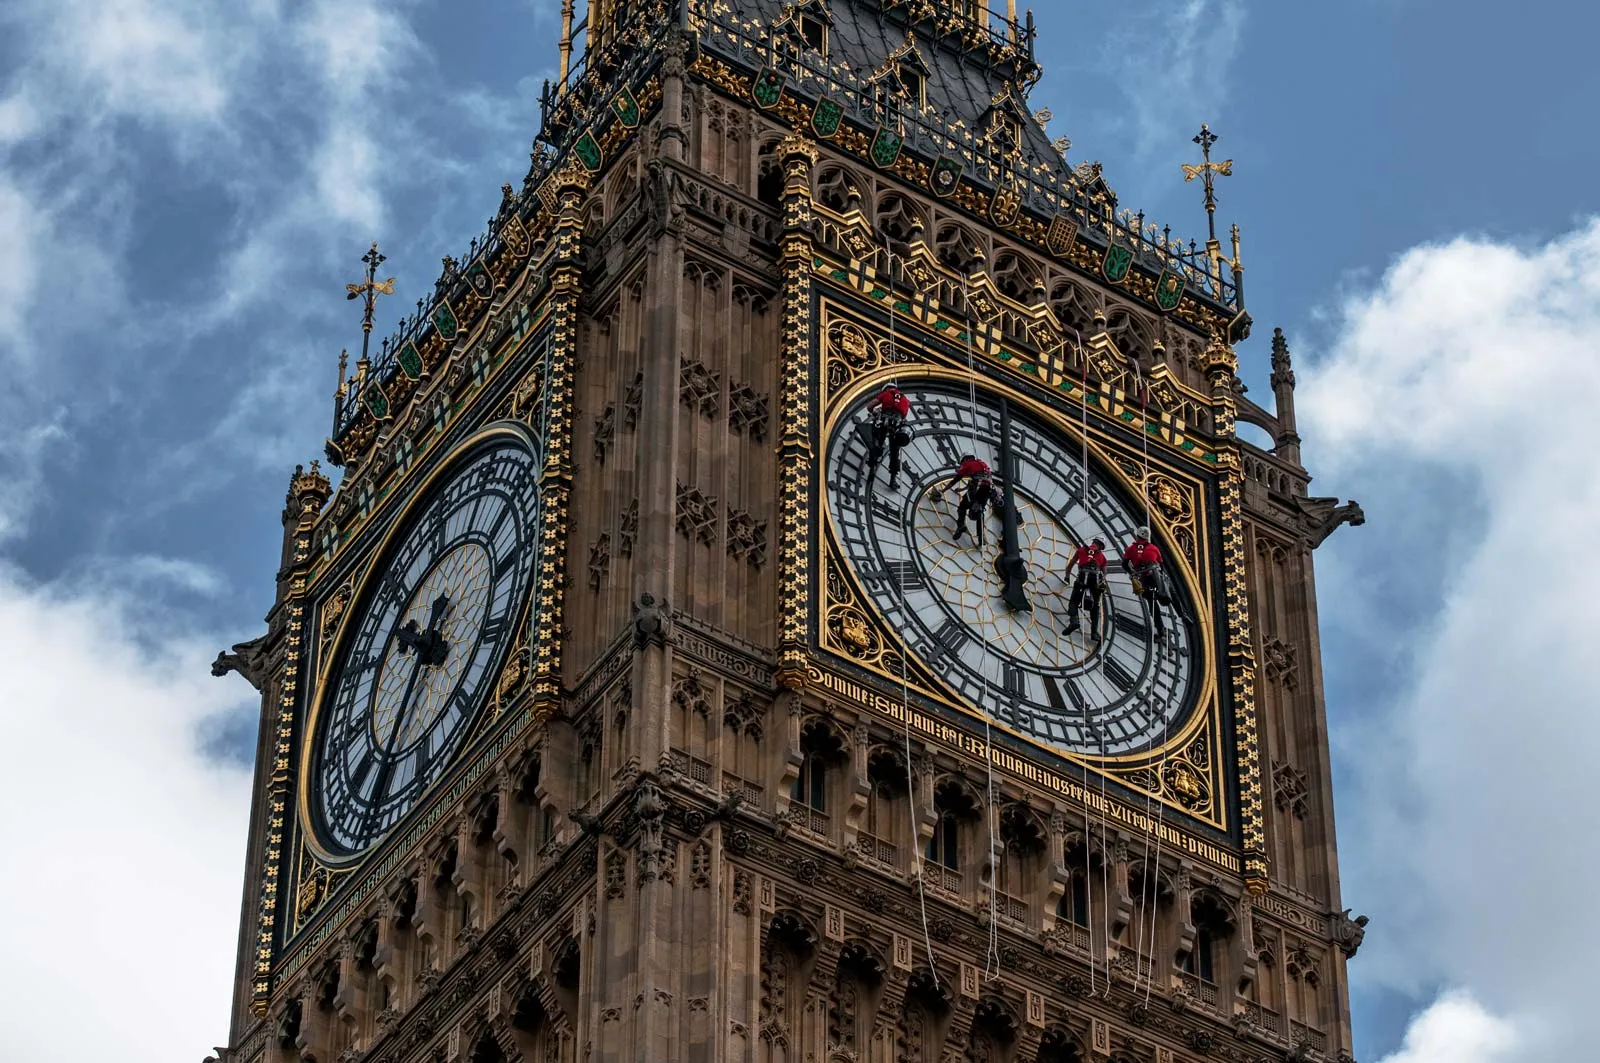 Where Is The Big Ben Clock